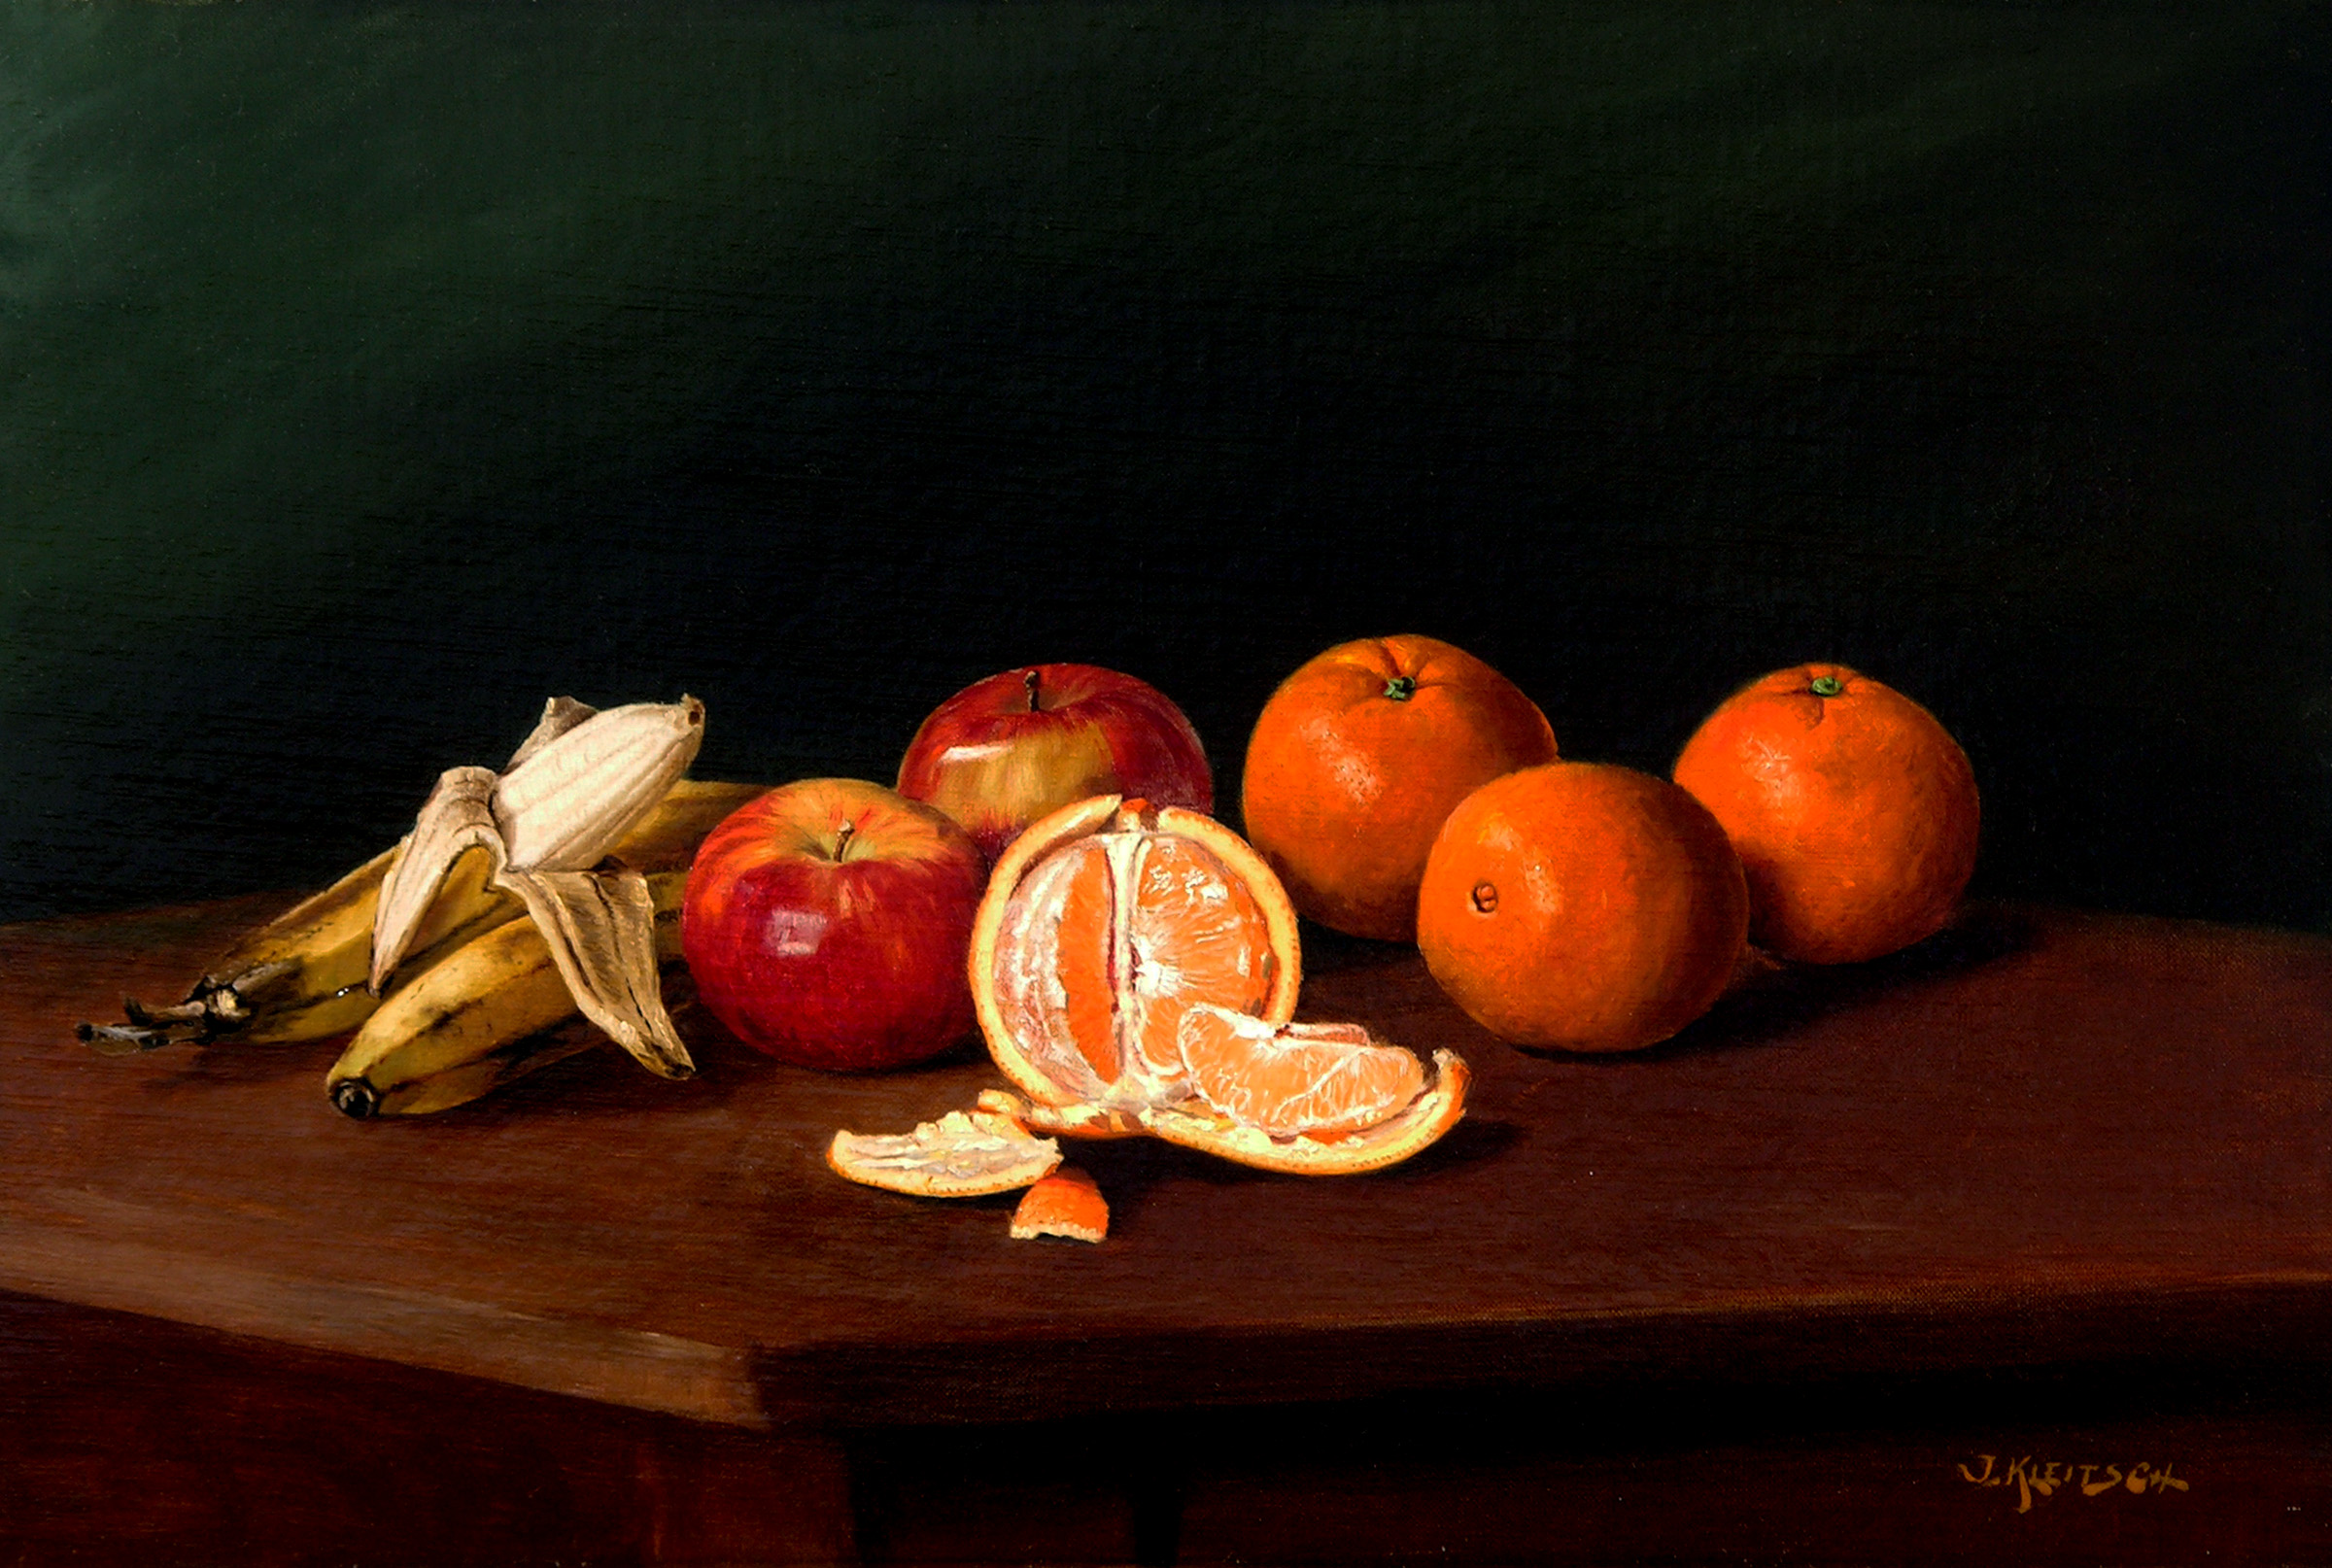    Still Life with Fruit   / Oil on Canvas, 16 x 24 in. / Private Collection 